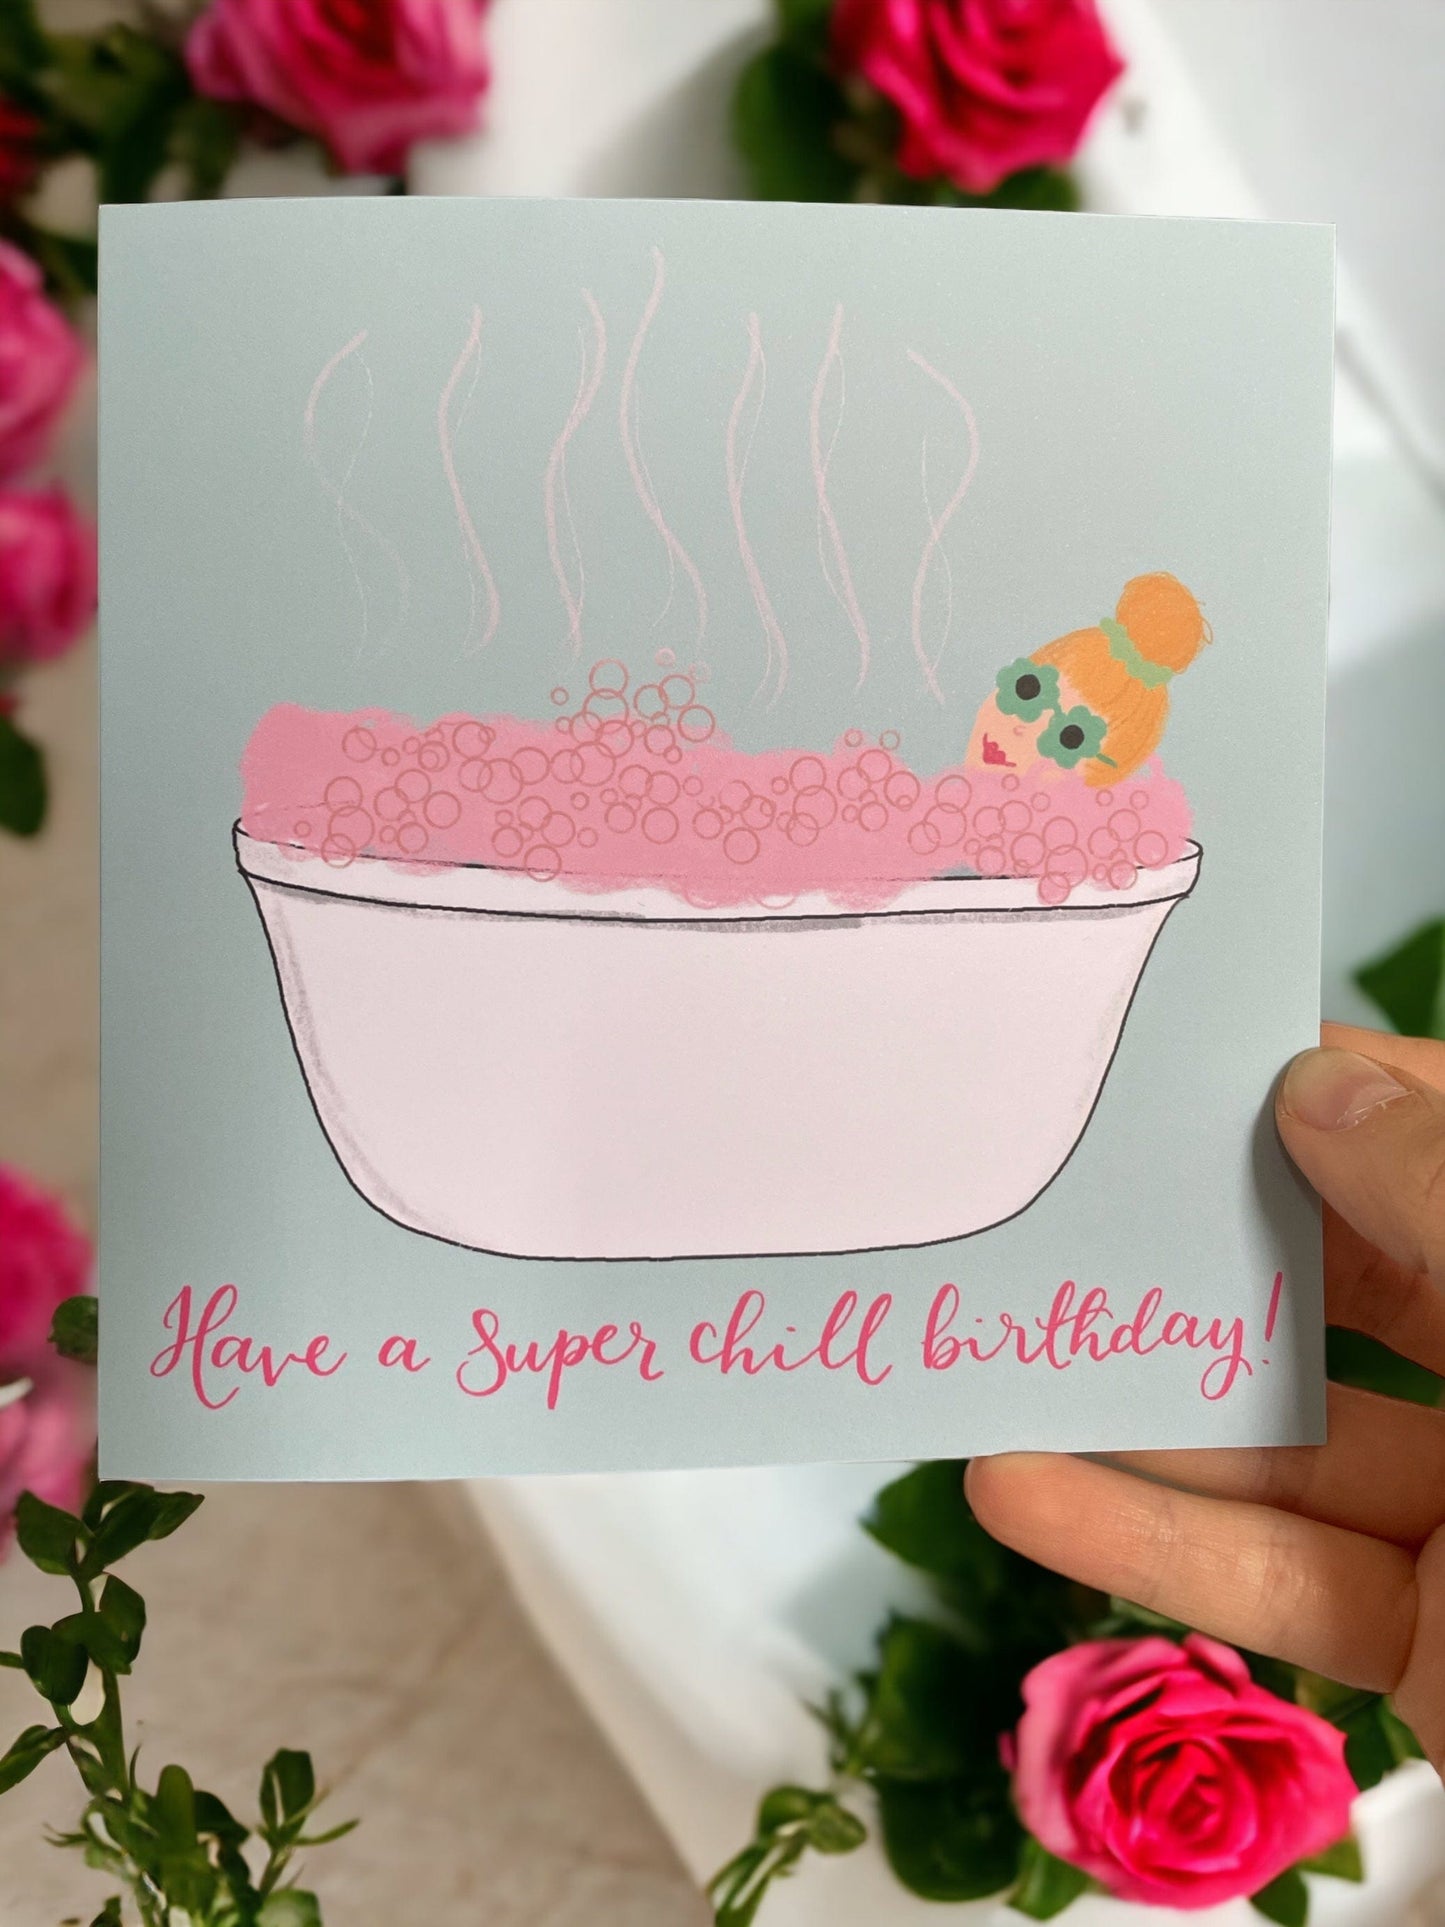 And Hope Designs Super chill birthday card